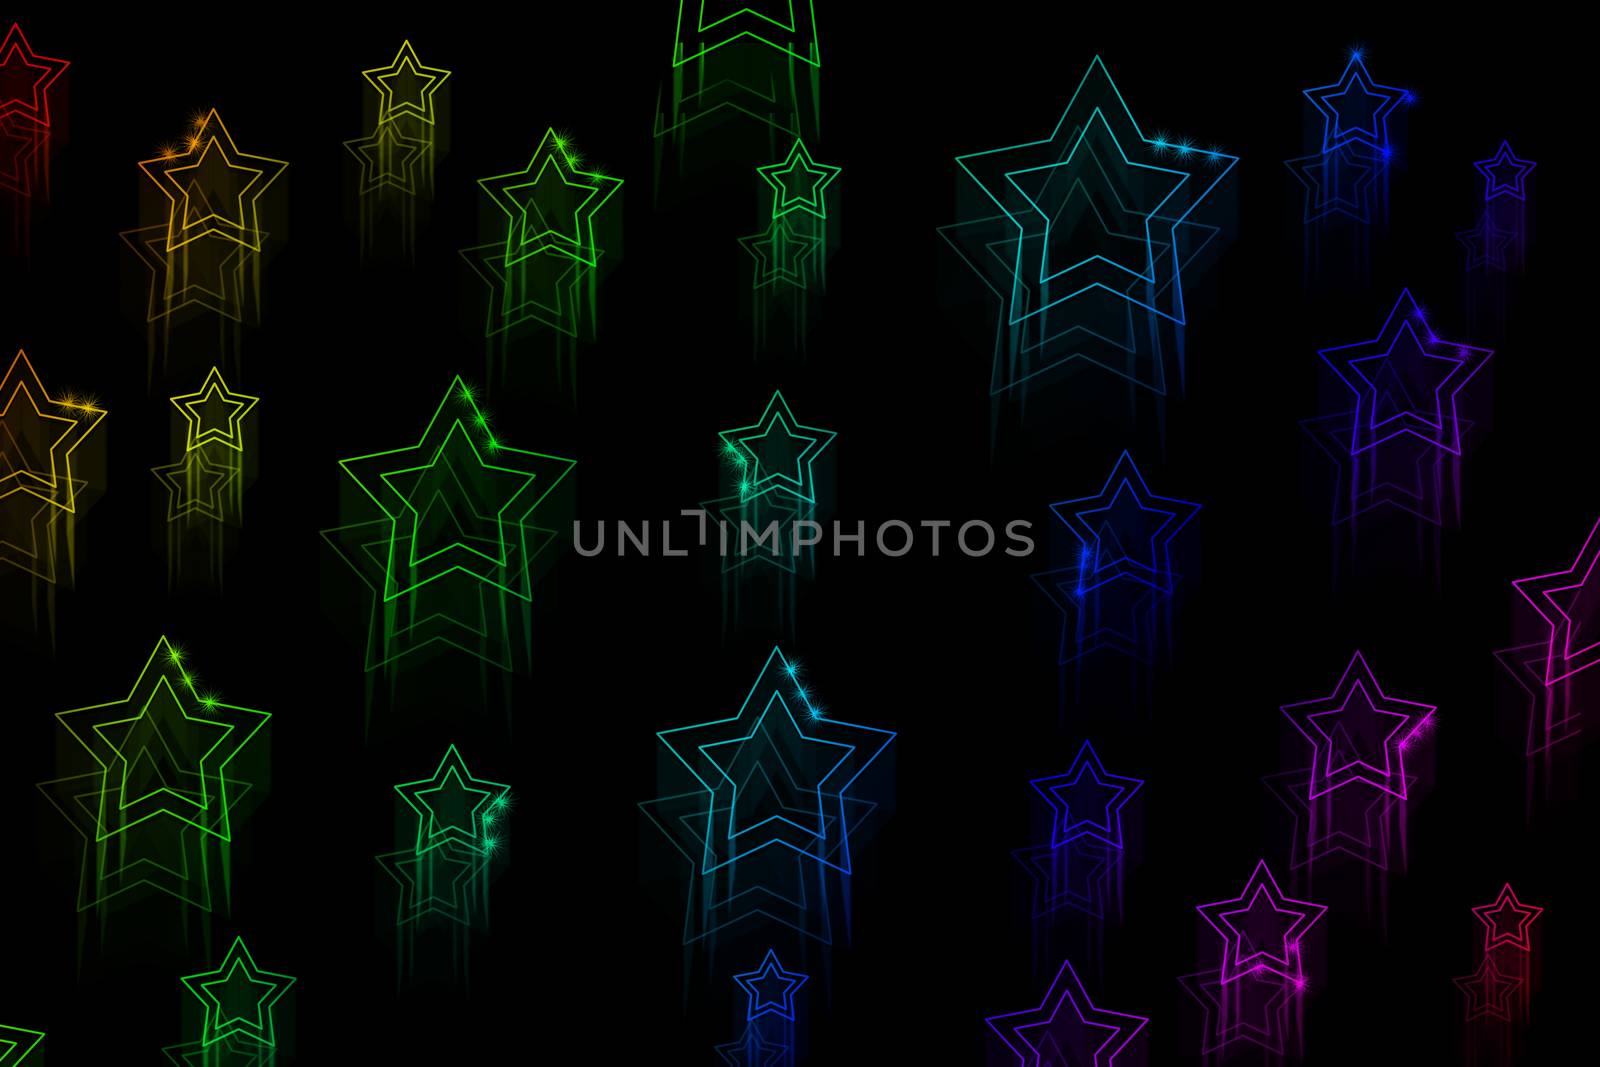 Lots of neon stars  by natali_brill